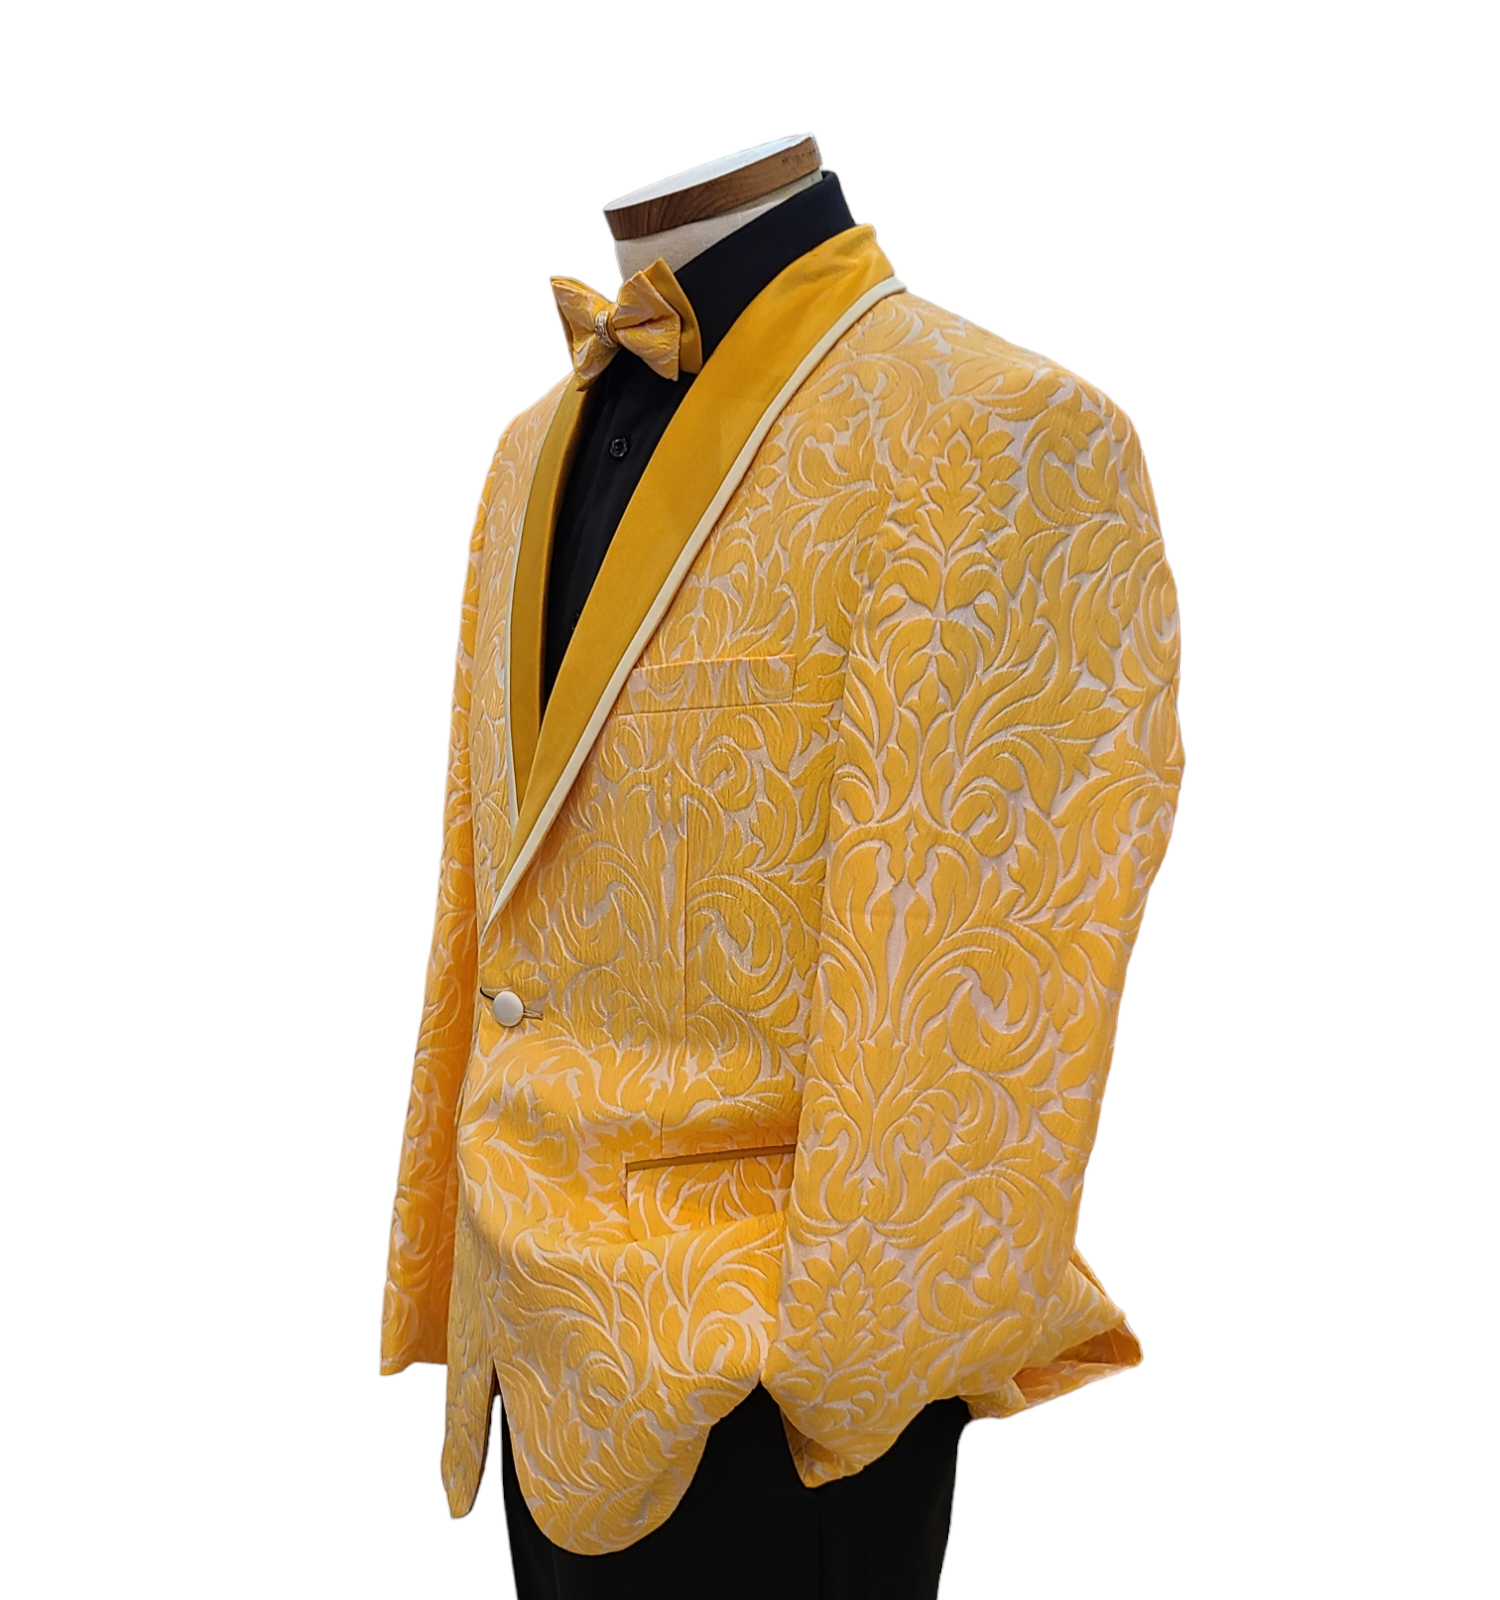 Cielo Slim Fit Sport Jacket withMatching Bow Tie